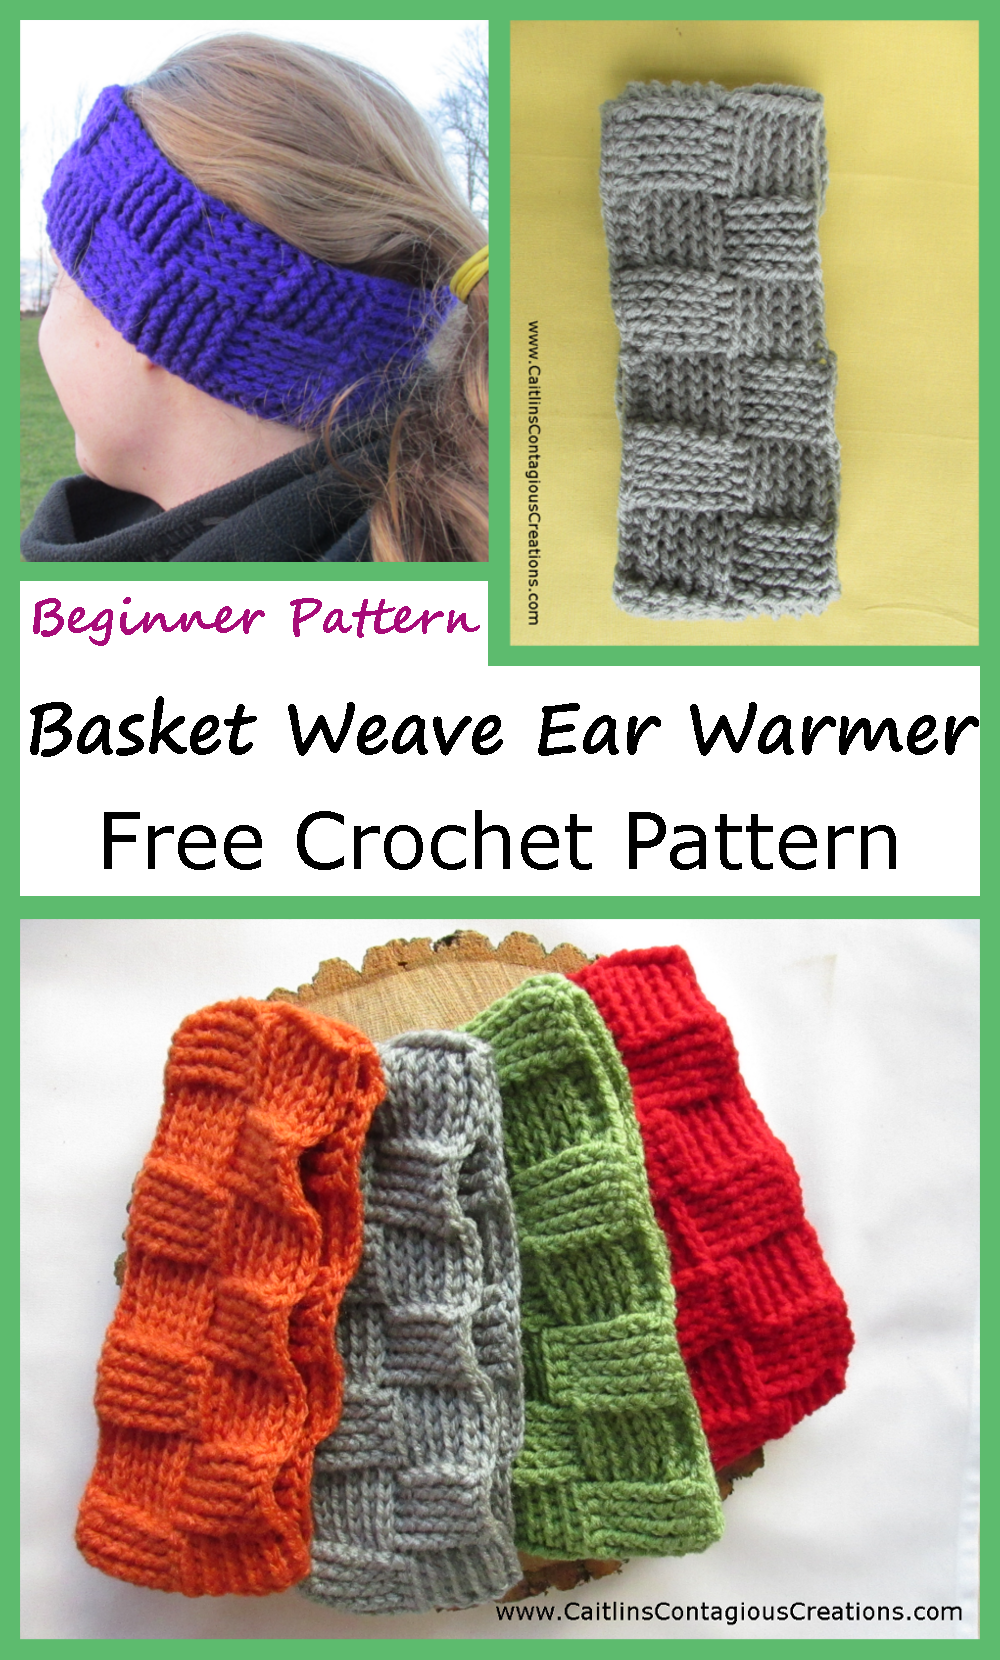 Basket Weave Ear Warmer Crochet Pattern. This winter headband will keep your ears warm and your head cool during outdoor winter activities.  This beginner friendly crochet design is easy and fast to work. Written directions also include photos for reference.